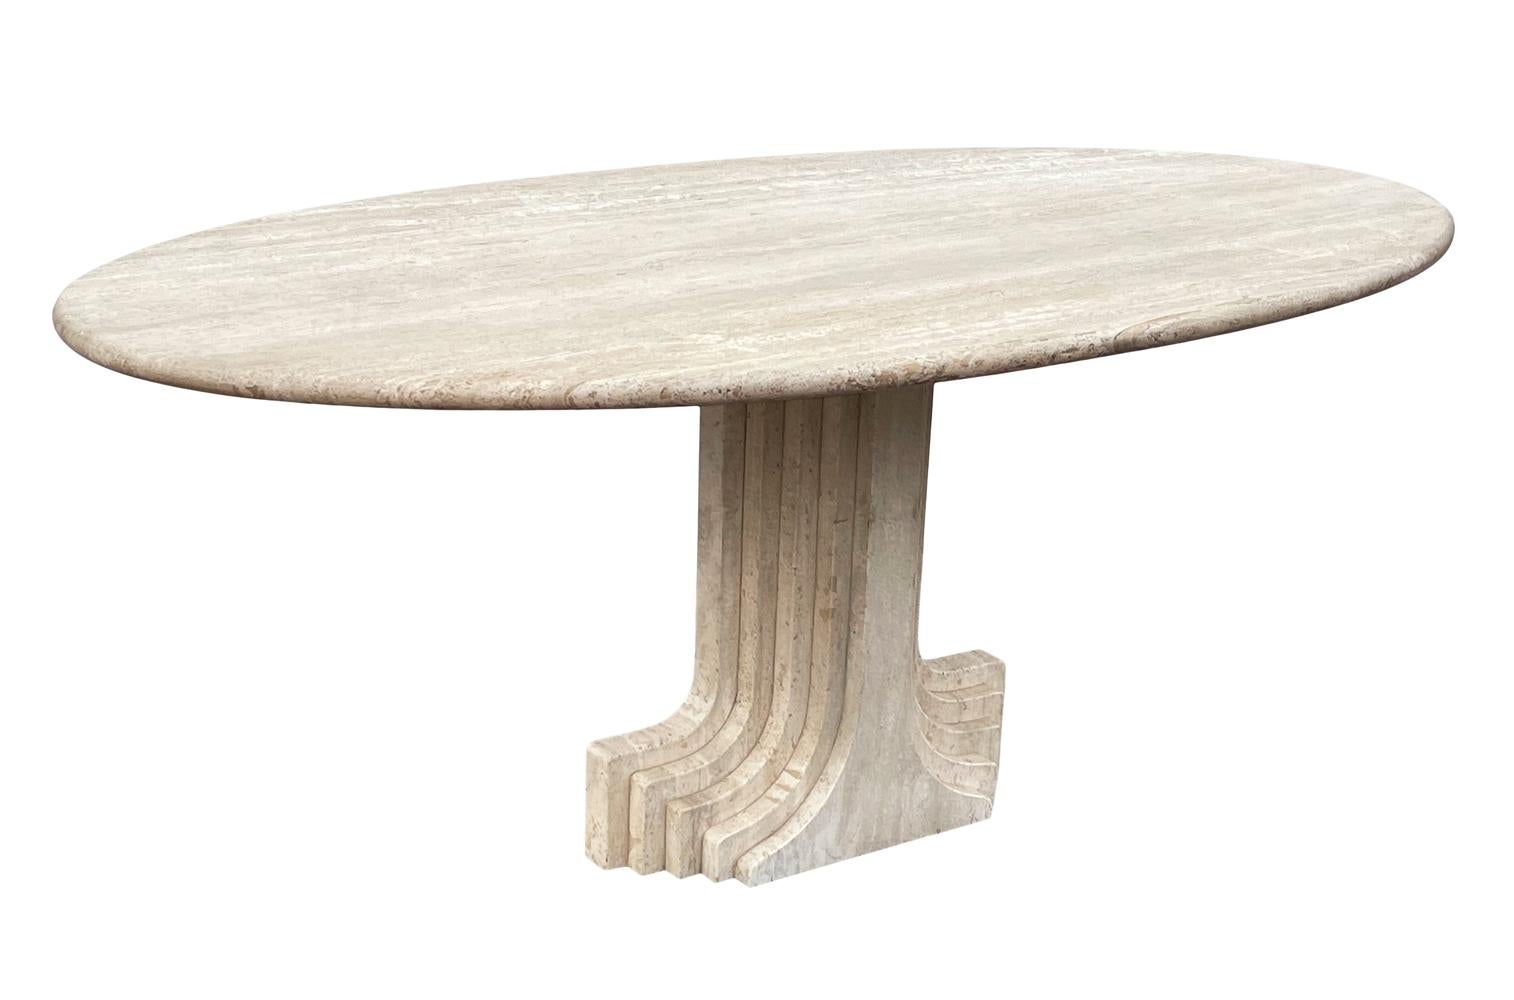 Mid Century Italian Modern Oval Travertine Marble Dining Table by Carlo Scarpa 1